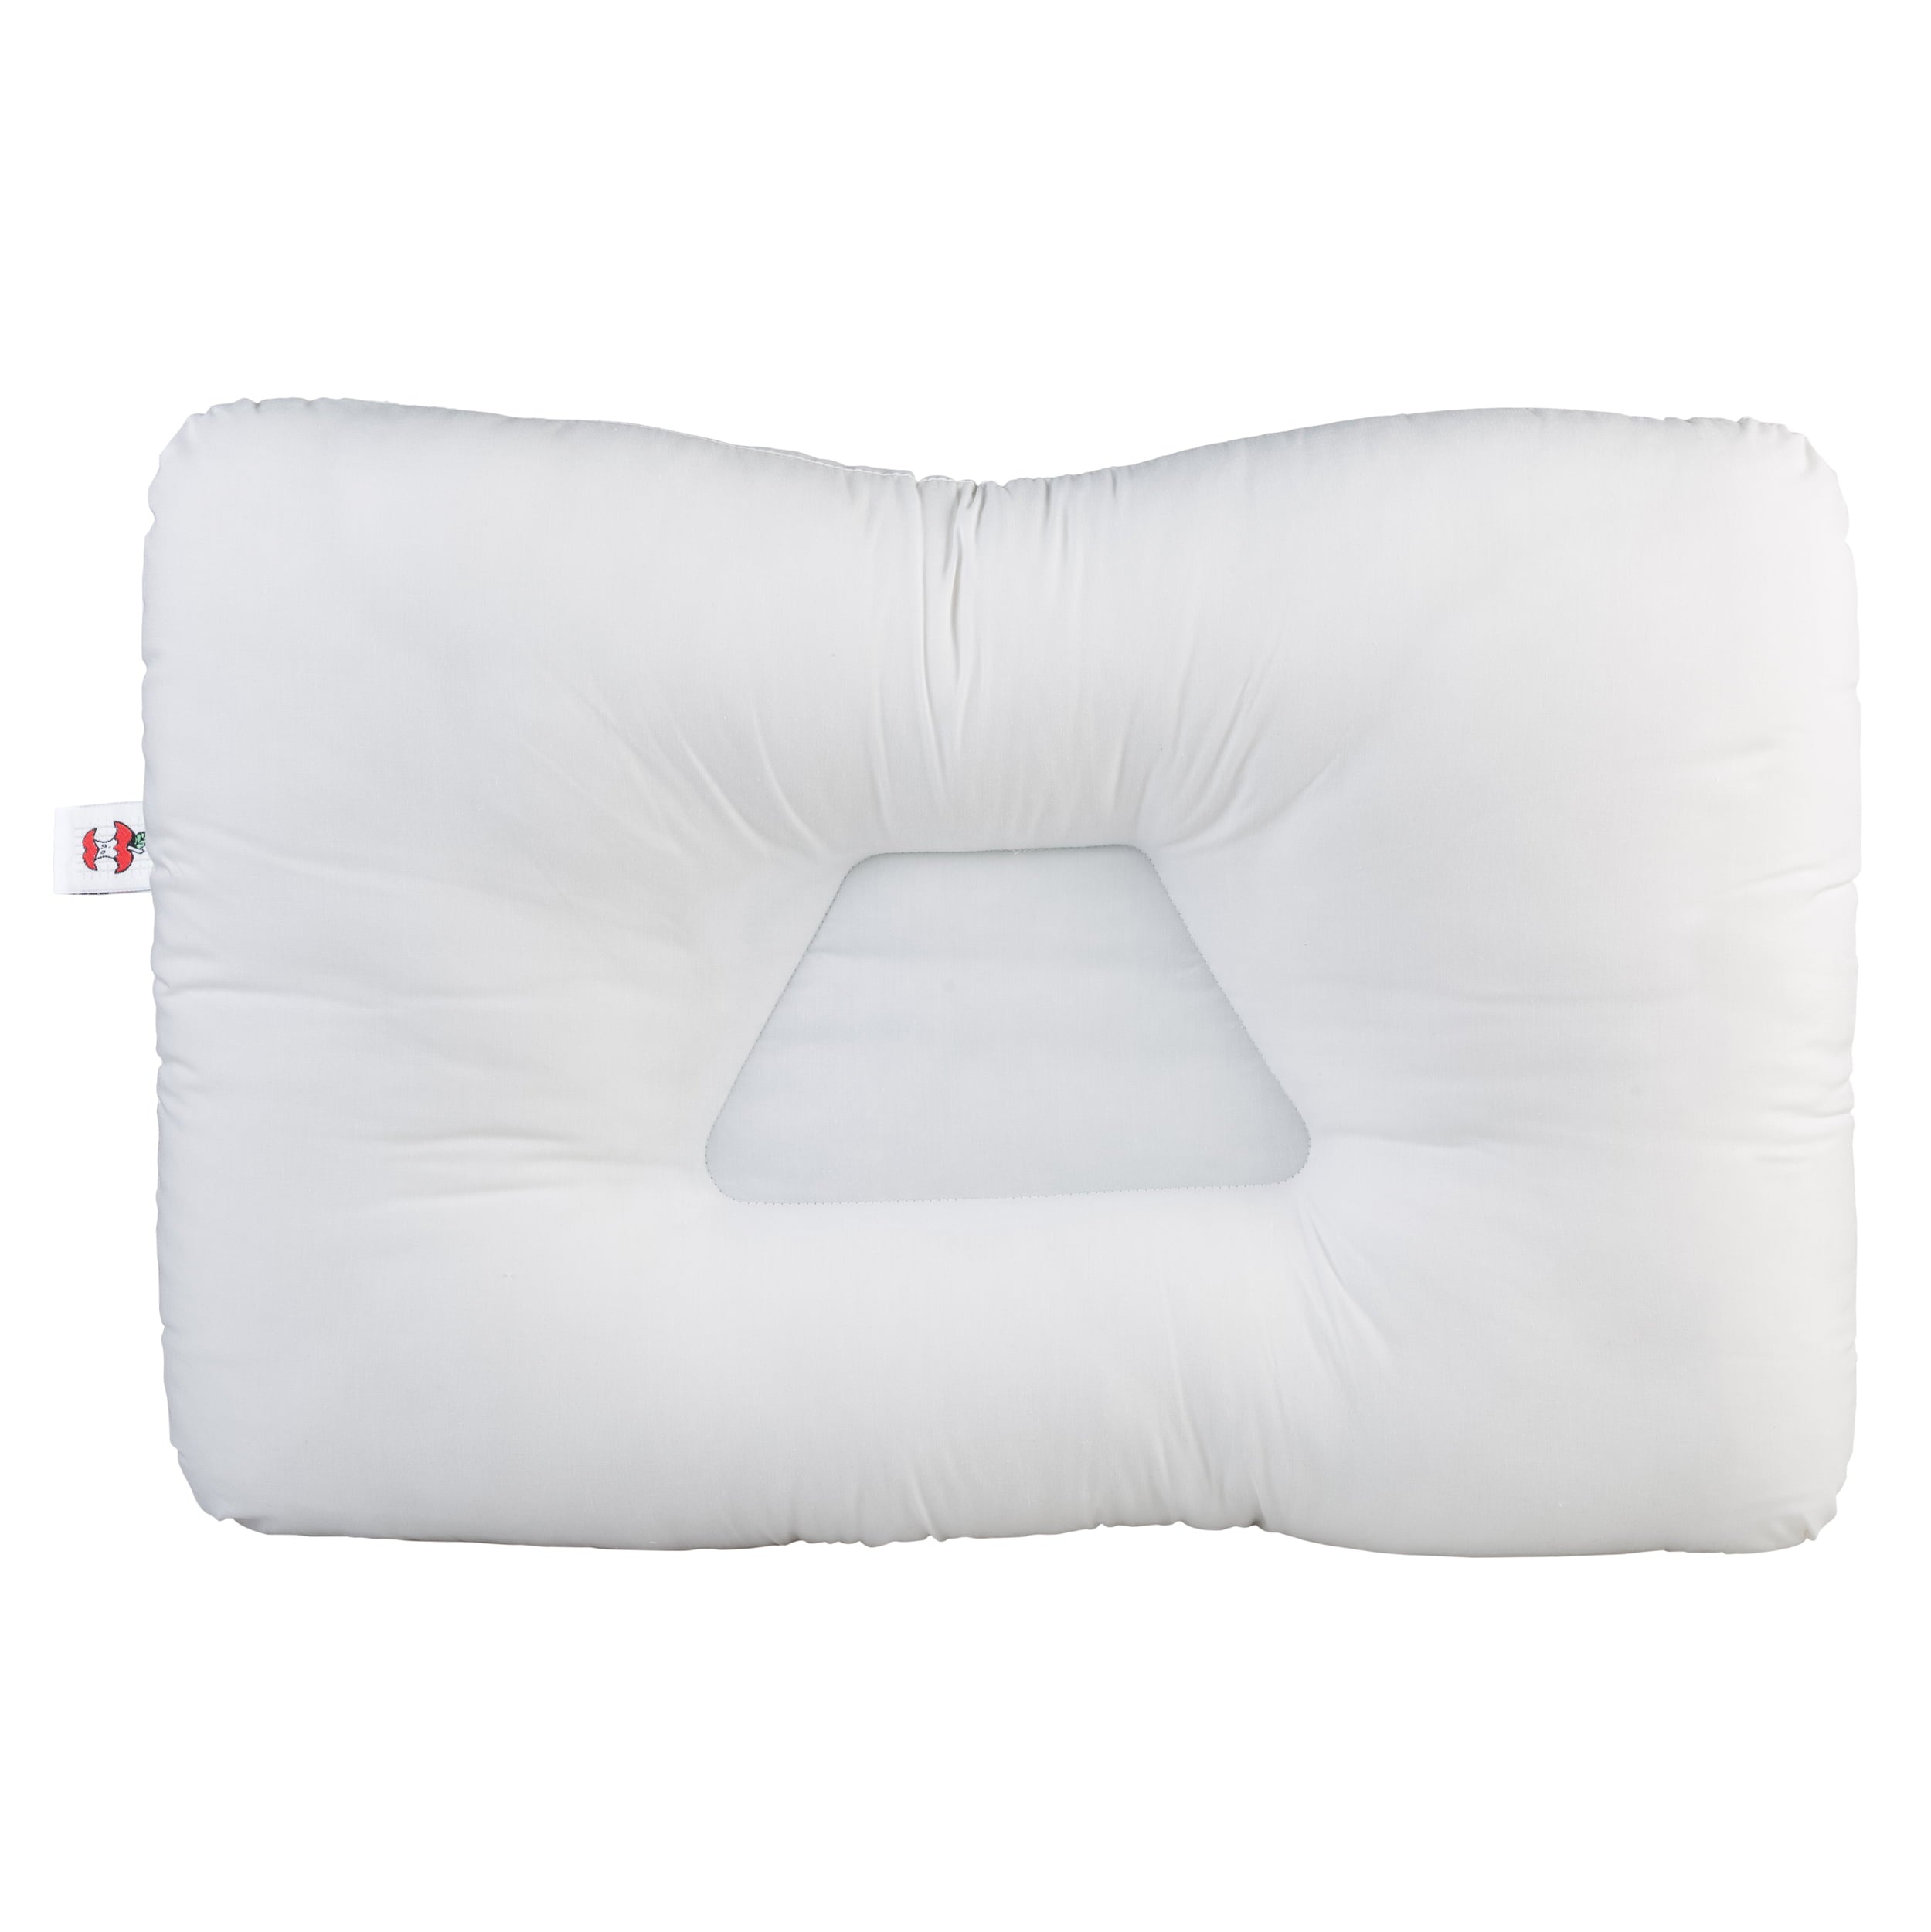 Core Products Tri-Core Cervical Orthopedic Neck Support Pillow, Helps Ease Pain- Mid-size- Firm